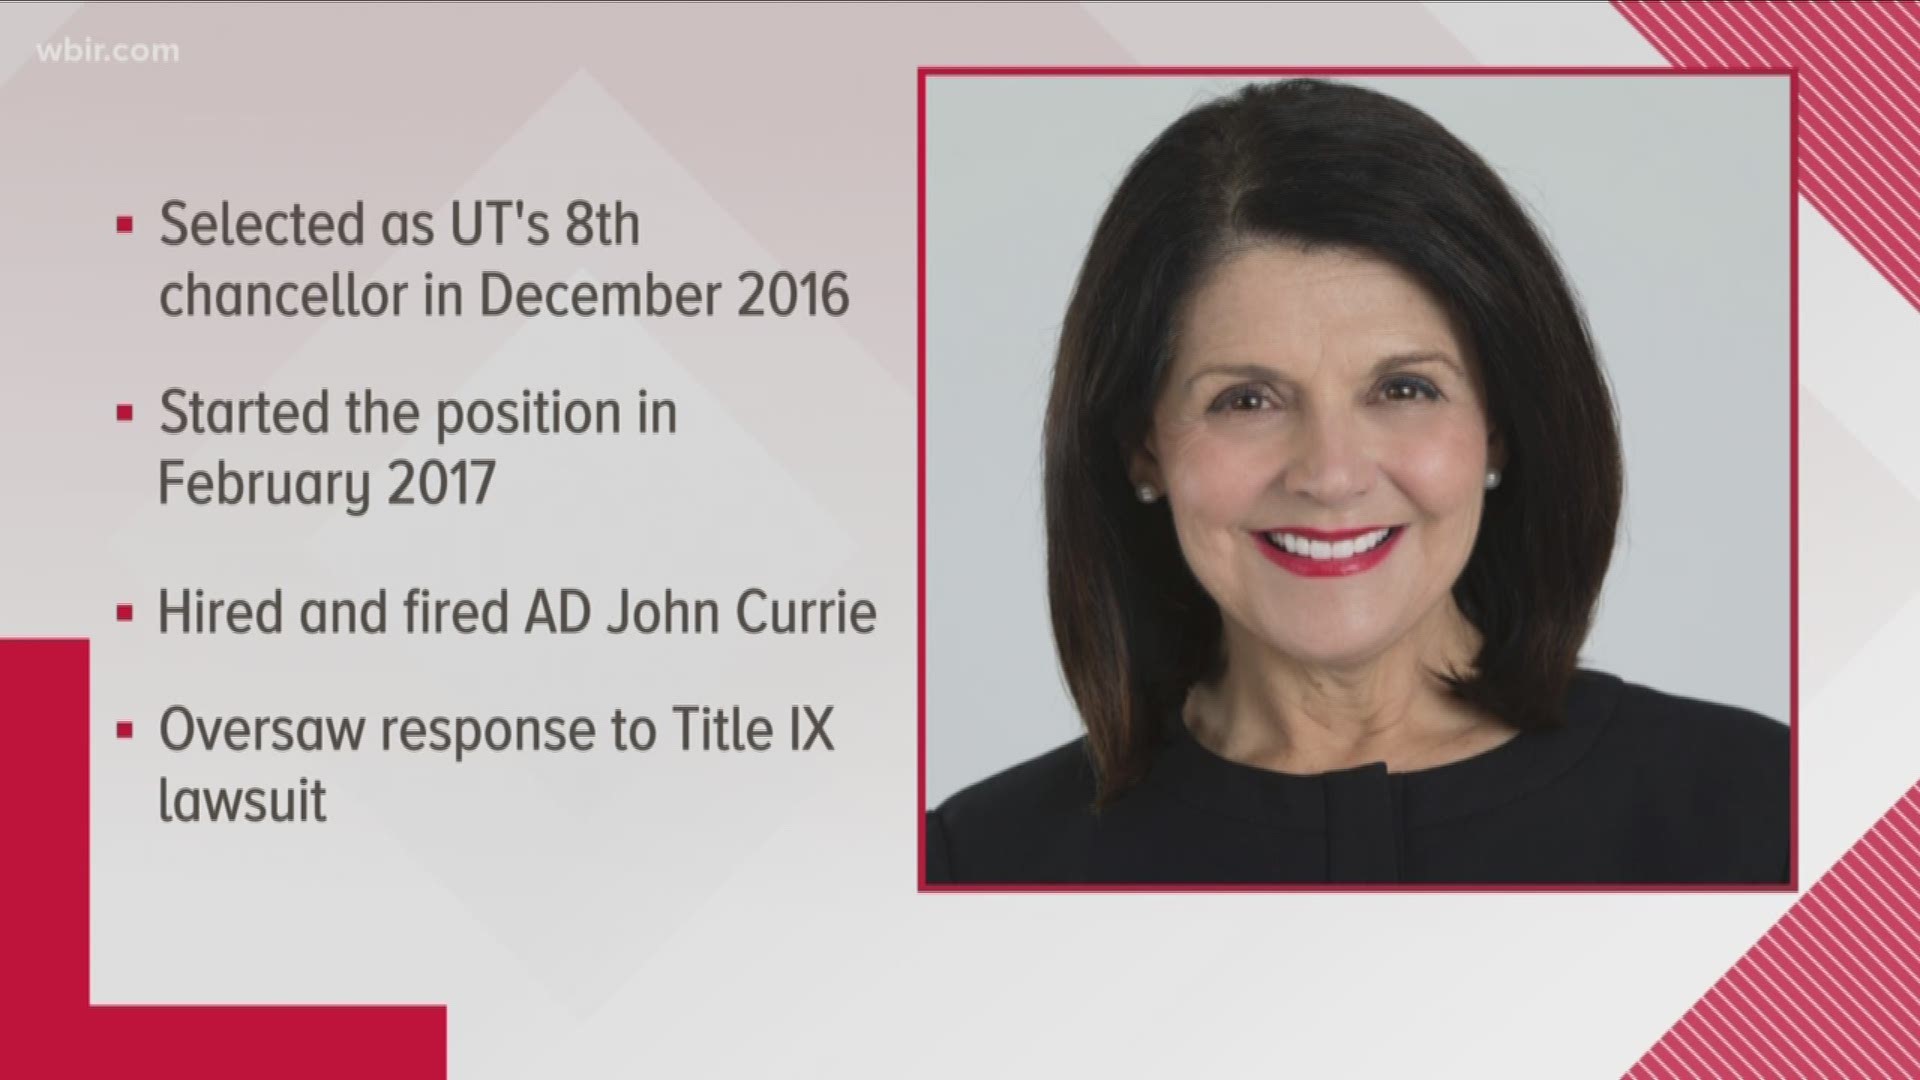 May 2, 2018: Beverly Davenport will no longer serve as the Chancellor at the University of Tennessee-Knoxville after July 1.